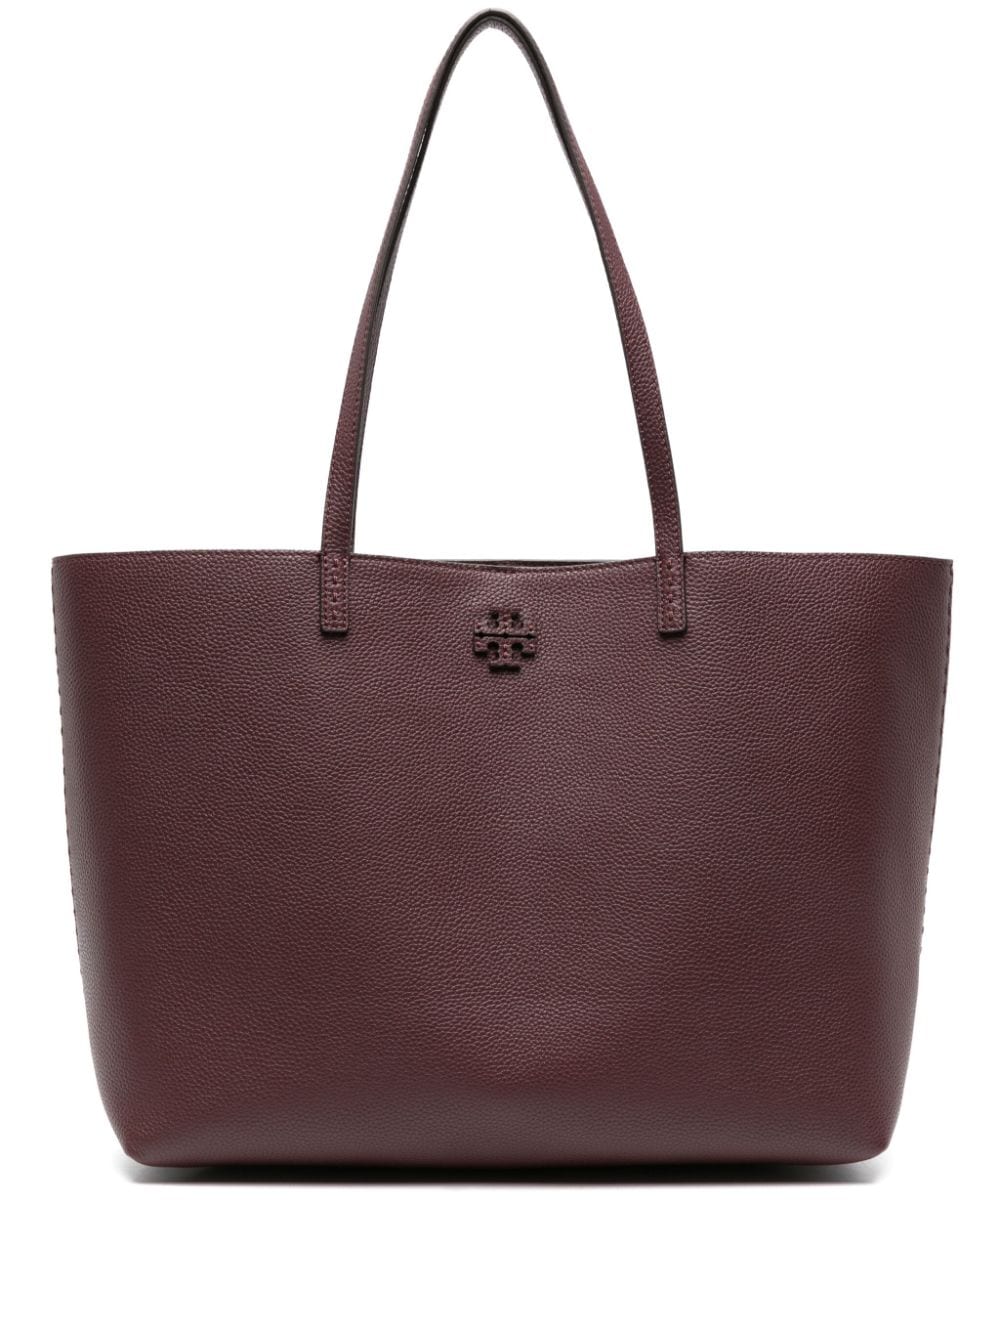 Tory Burch McGraw grained-leather tote bag - Purple von Tory Burch